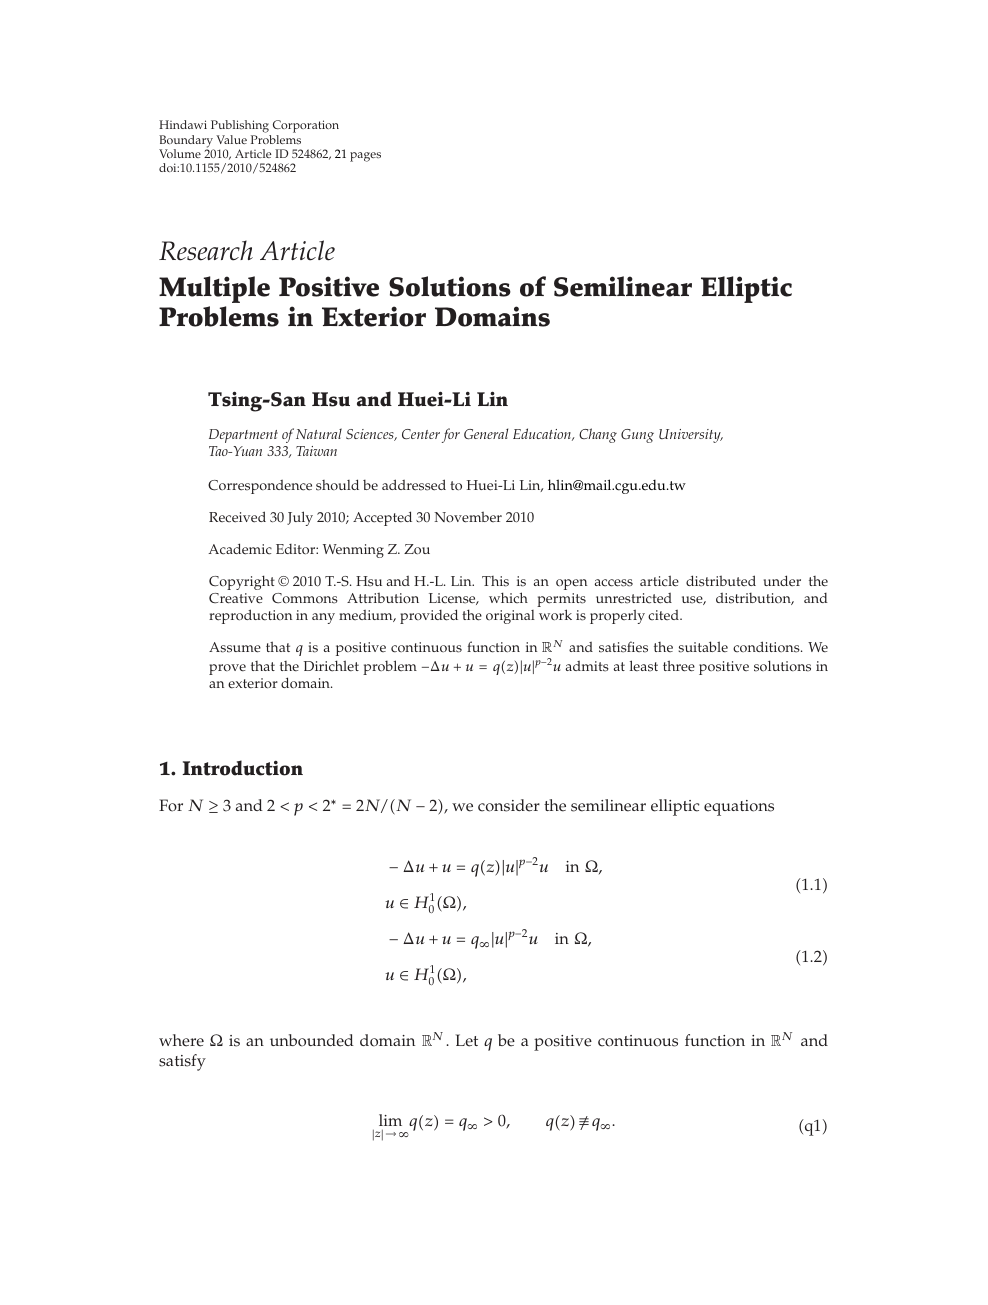 Multiple Positive Solutions Of Semilinear Elliptic Problems In Exterior Domains Topic Of Research Paper In Mathematics Download Scholarly Article Pdf And Read For Free On Cyberleninka Open Science Hub